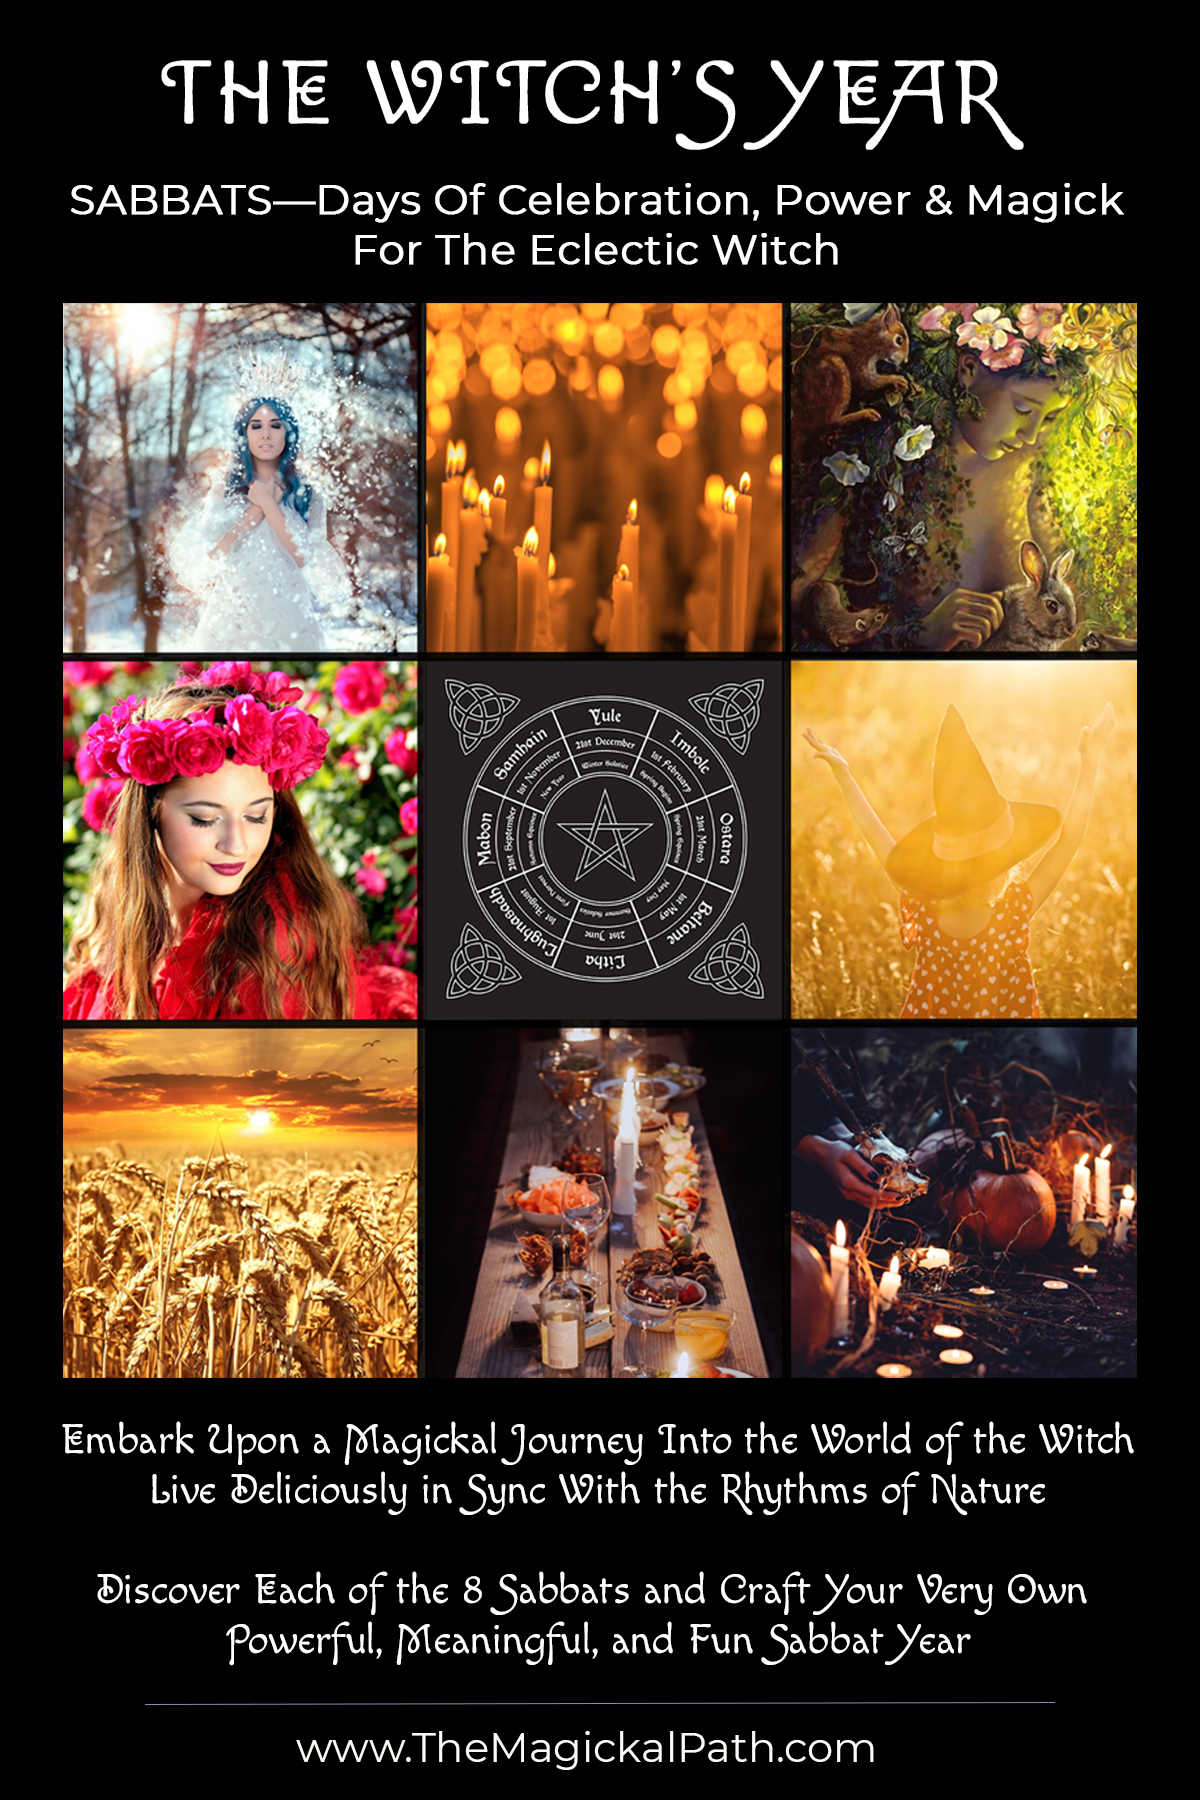 A composite of images each reflecting one of the sabbats in the witch's wheel of the year; it is the main image for The Witch's Year course